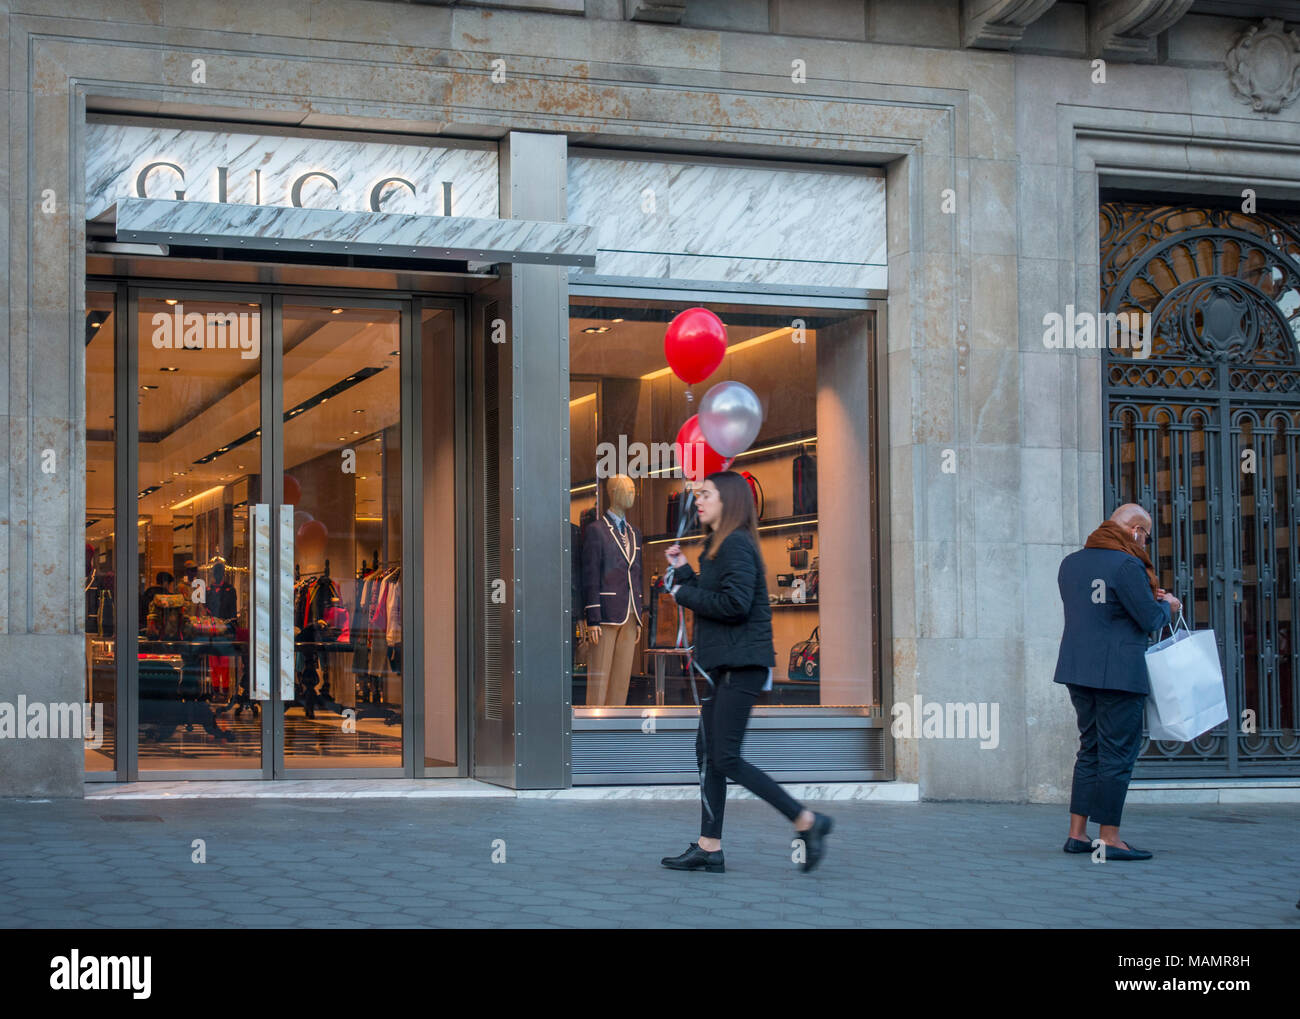 Barcelona, Spain. March 2018: People walking in front of Gucci shop Stock  Photo - Alamy